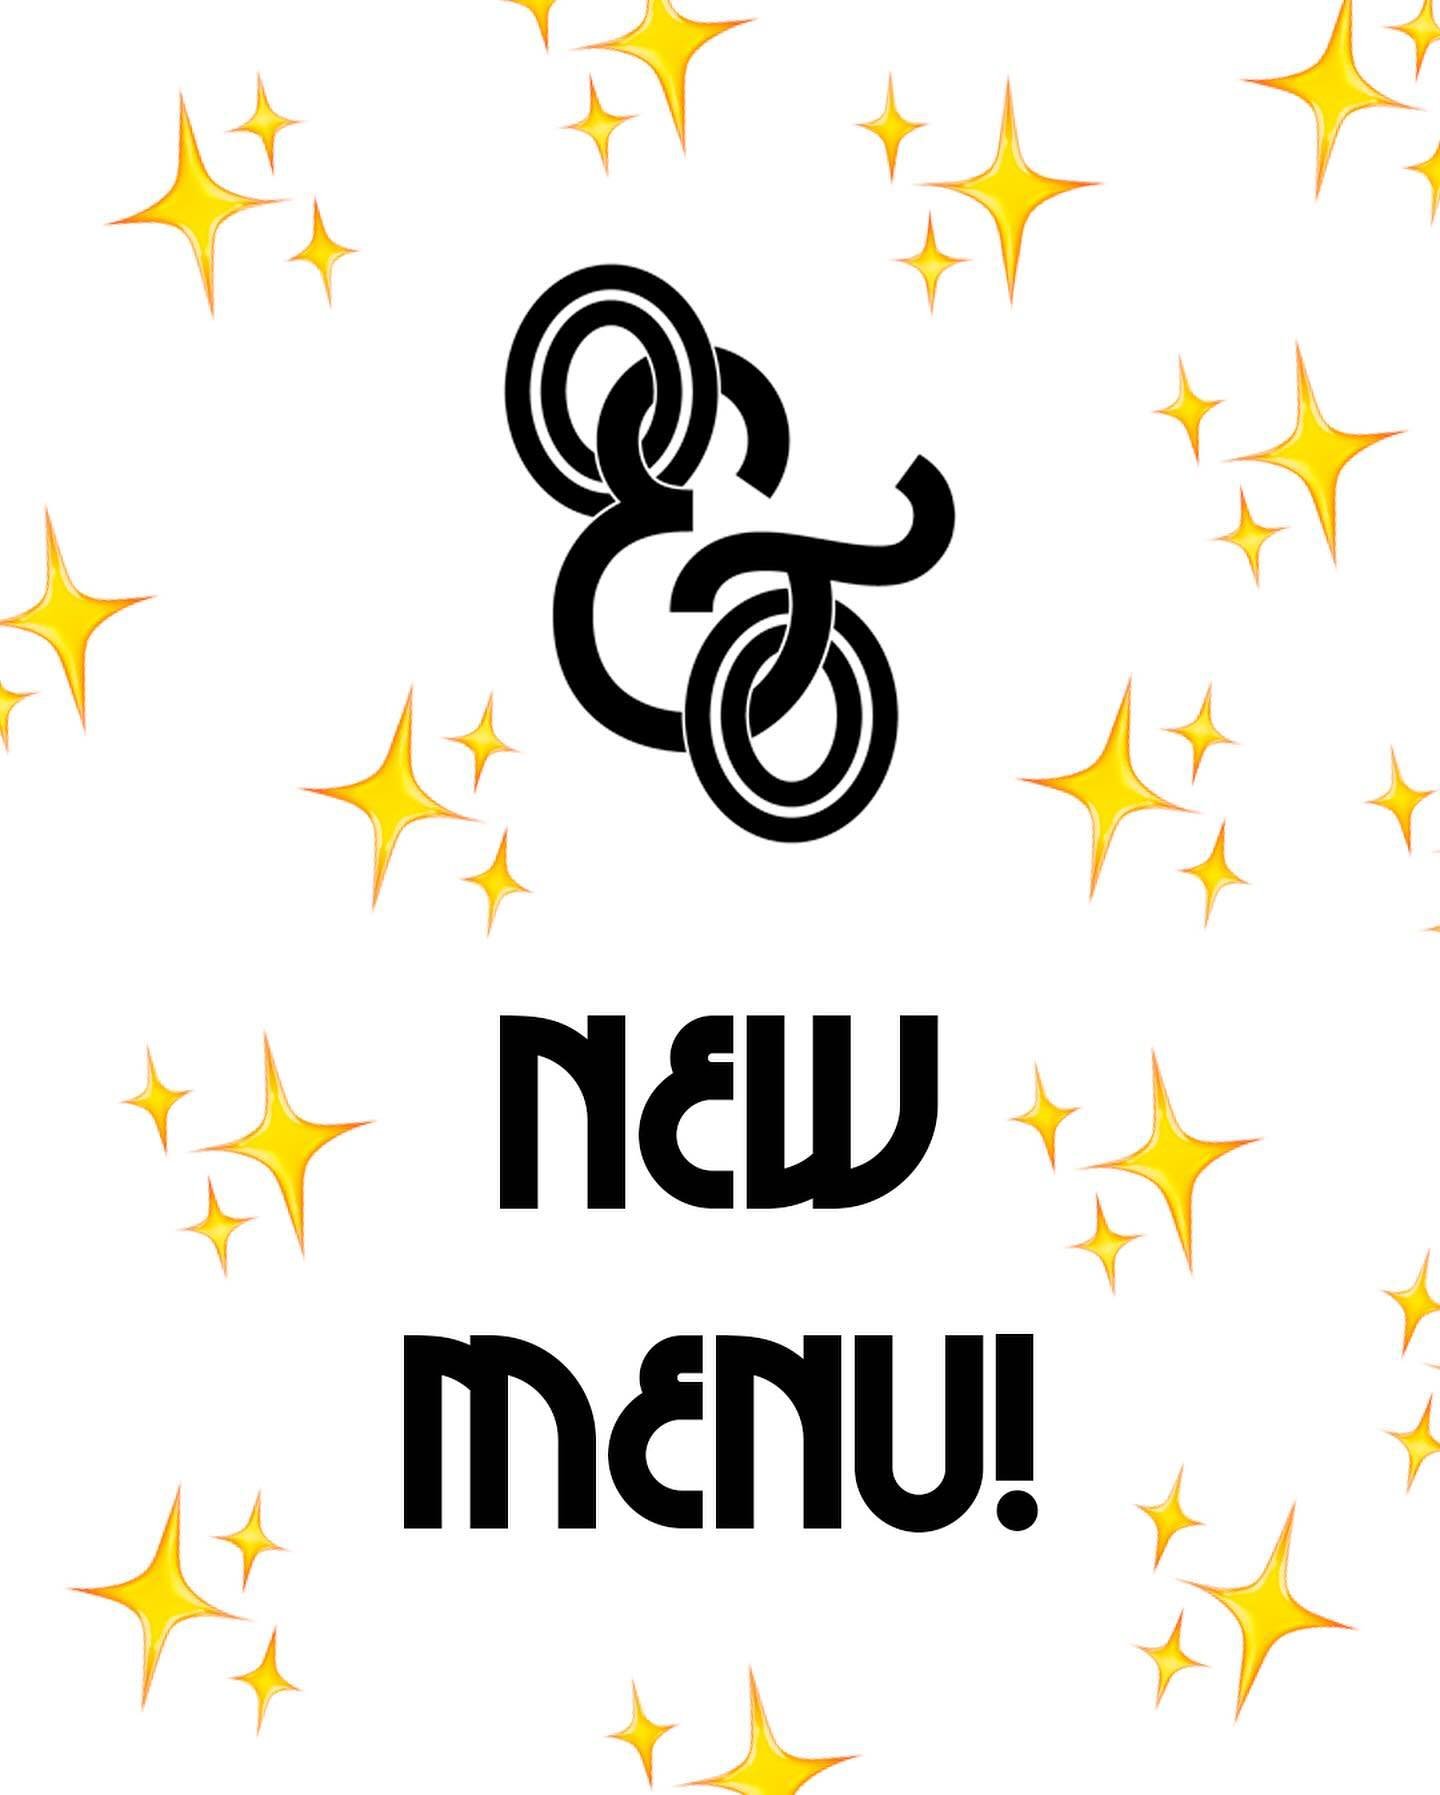 Have you checked out our new menu yet? We are having so much fun eating our way through it 🤤

#oneandonlywi #thatnewnew